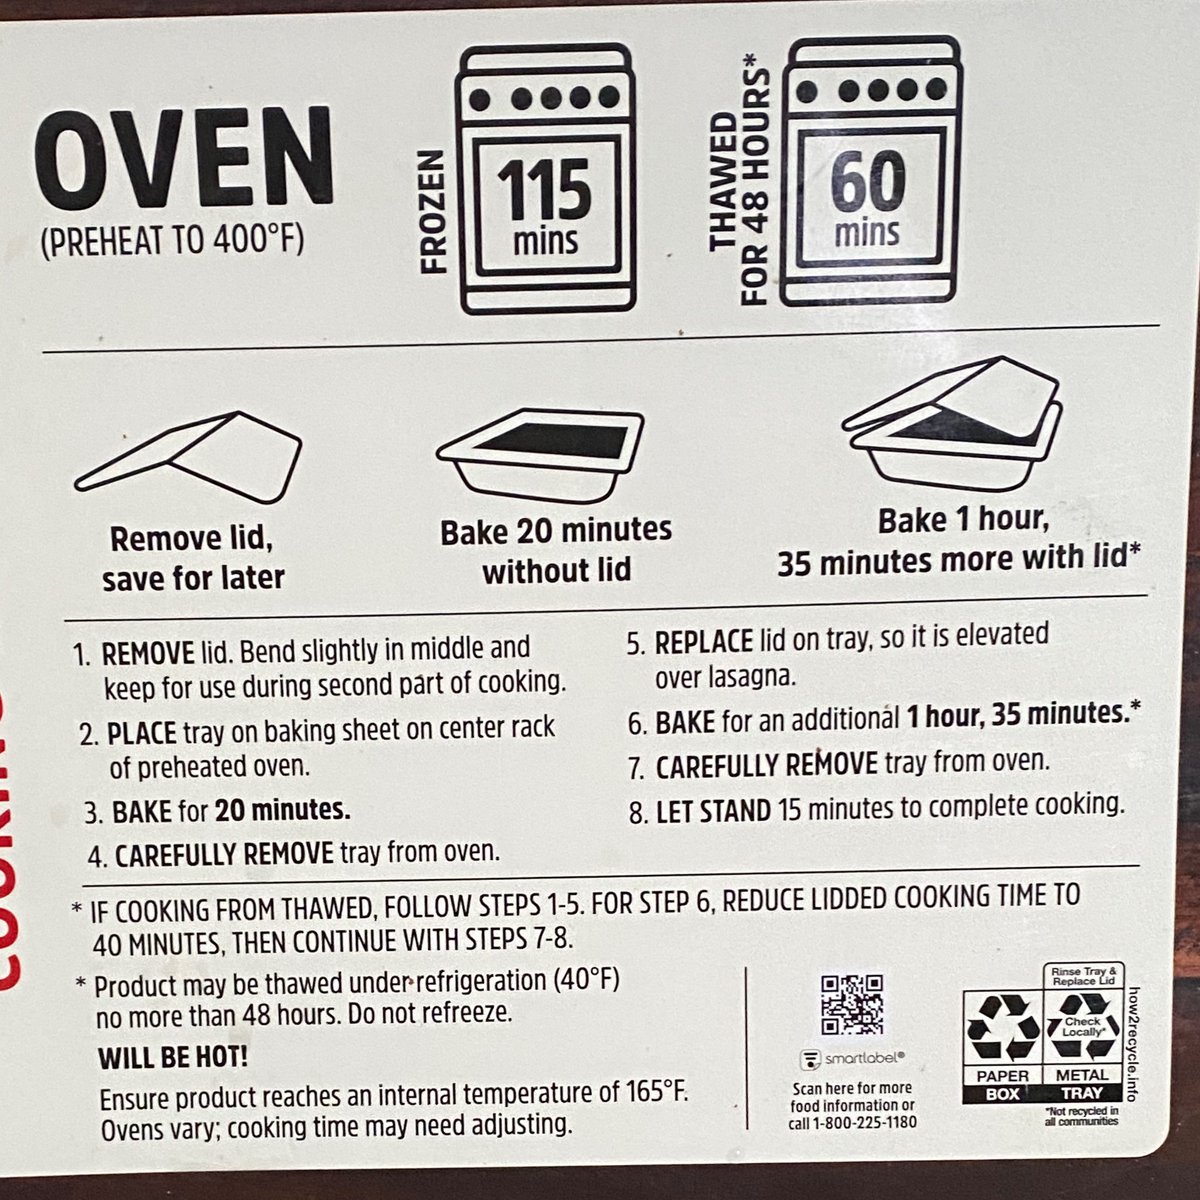 FROZEN LASAGNA today because I don’t feel like cooking. For my entire life, we bake the lasagna and remove the lid for the last several minutes. And now, we bake with lid off for the first 20 minutes? And then bake with the lid on? Thanks, Obama. Total food anarchy! #snarkin 😜